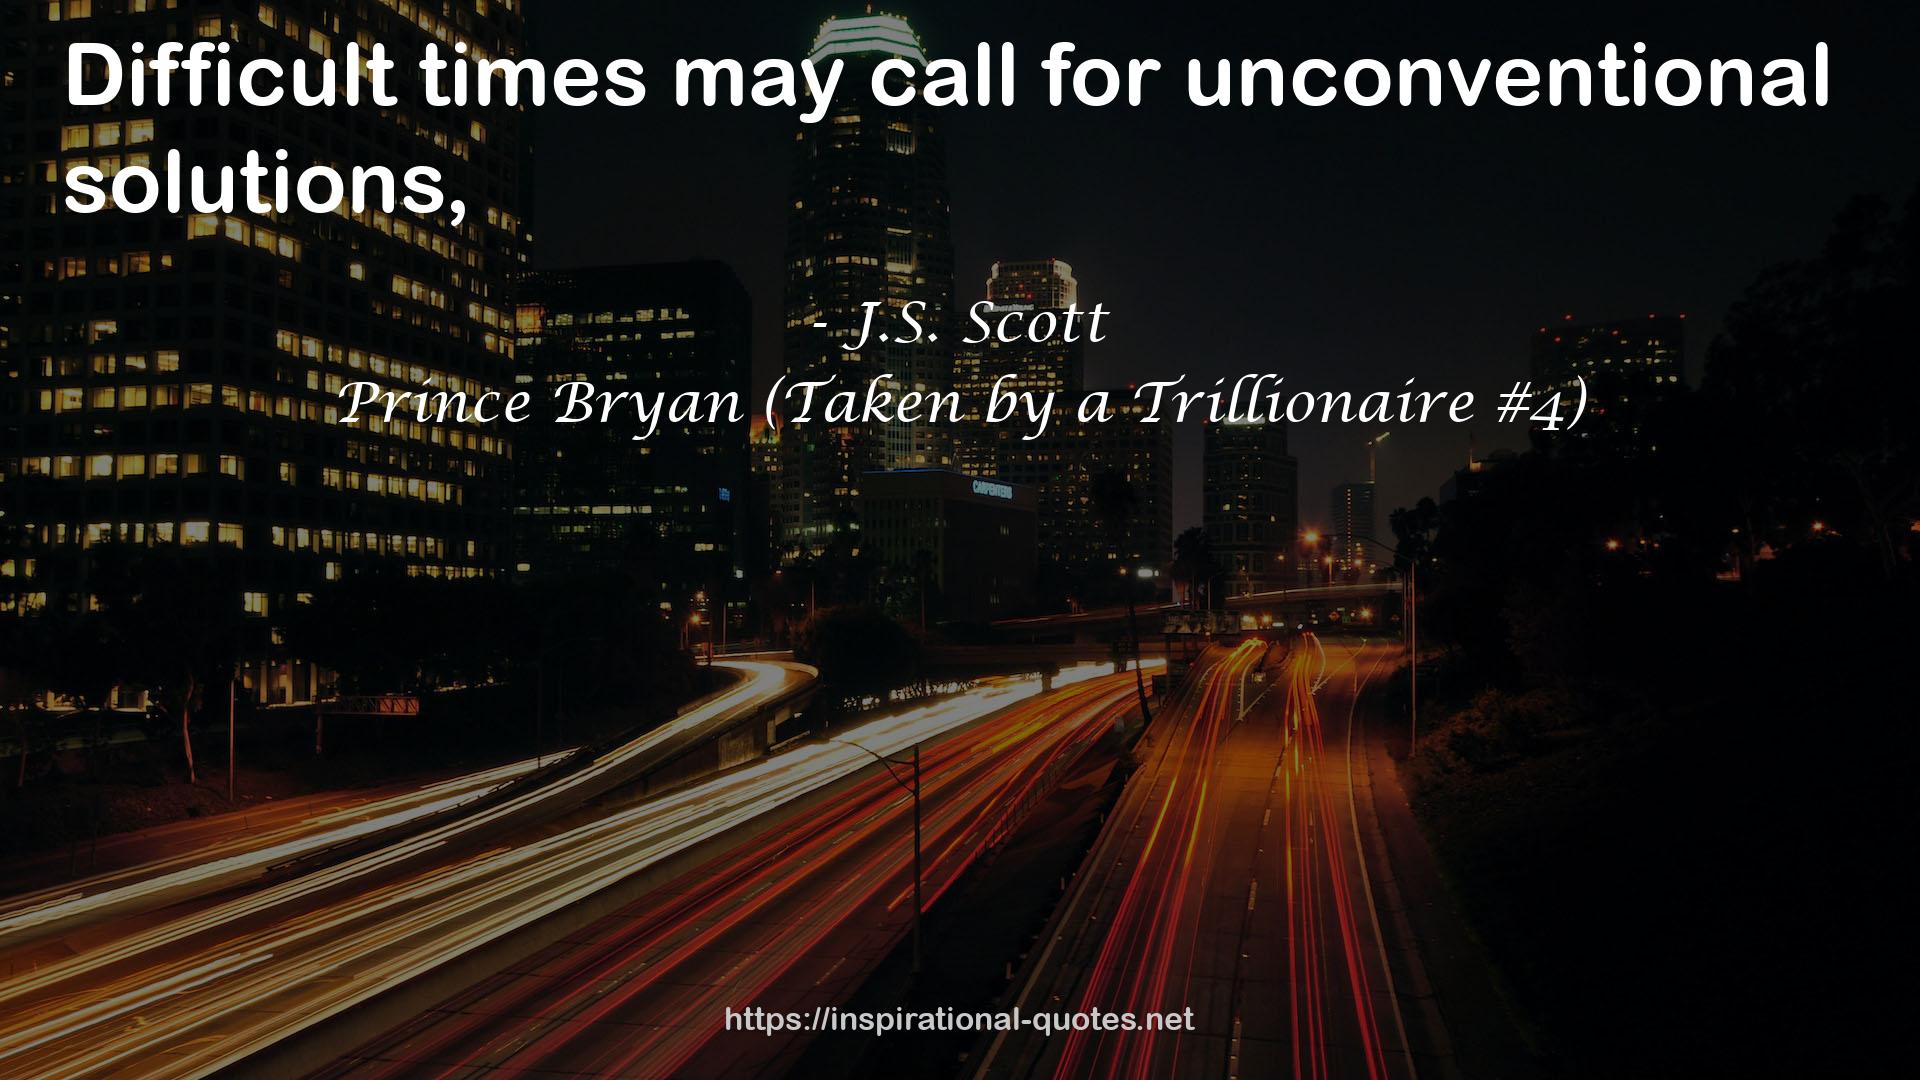 Prince Bryan (Taken by a Trillionaire #4) QUOTES